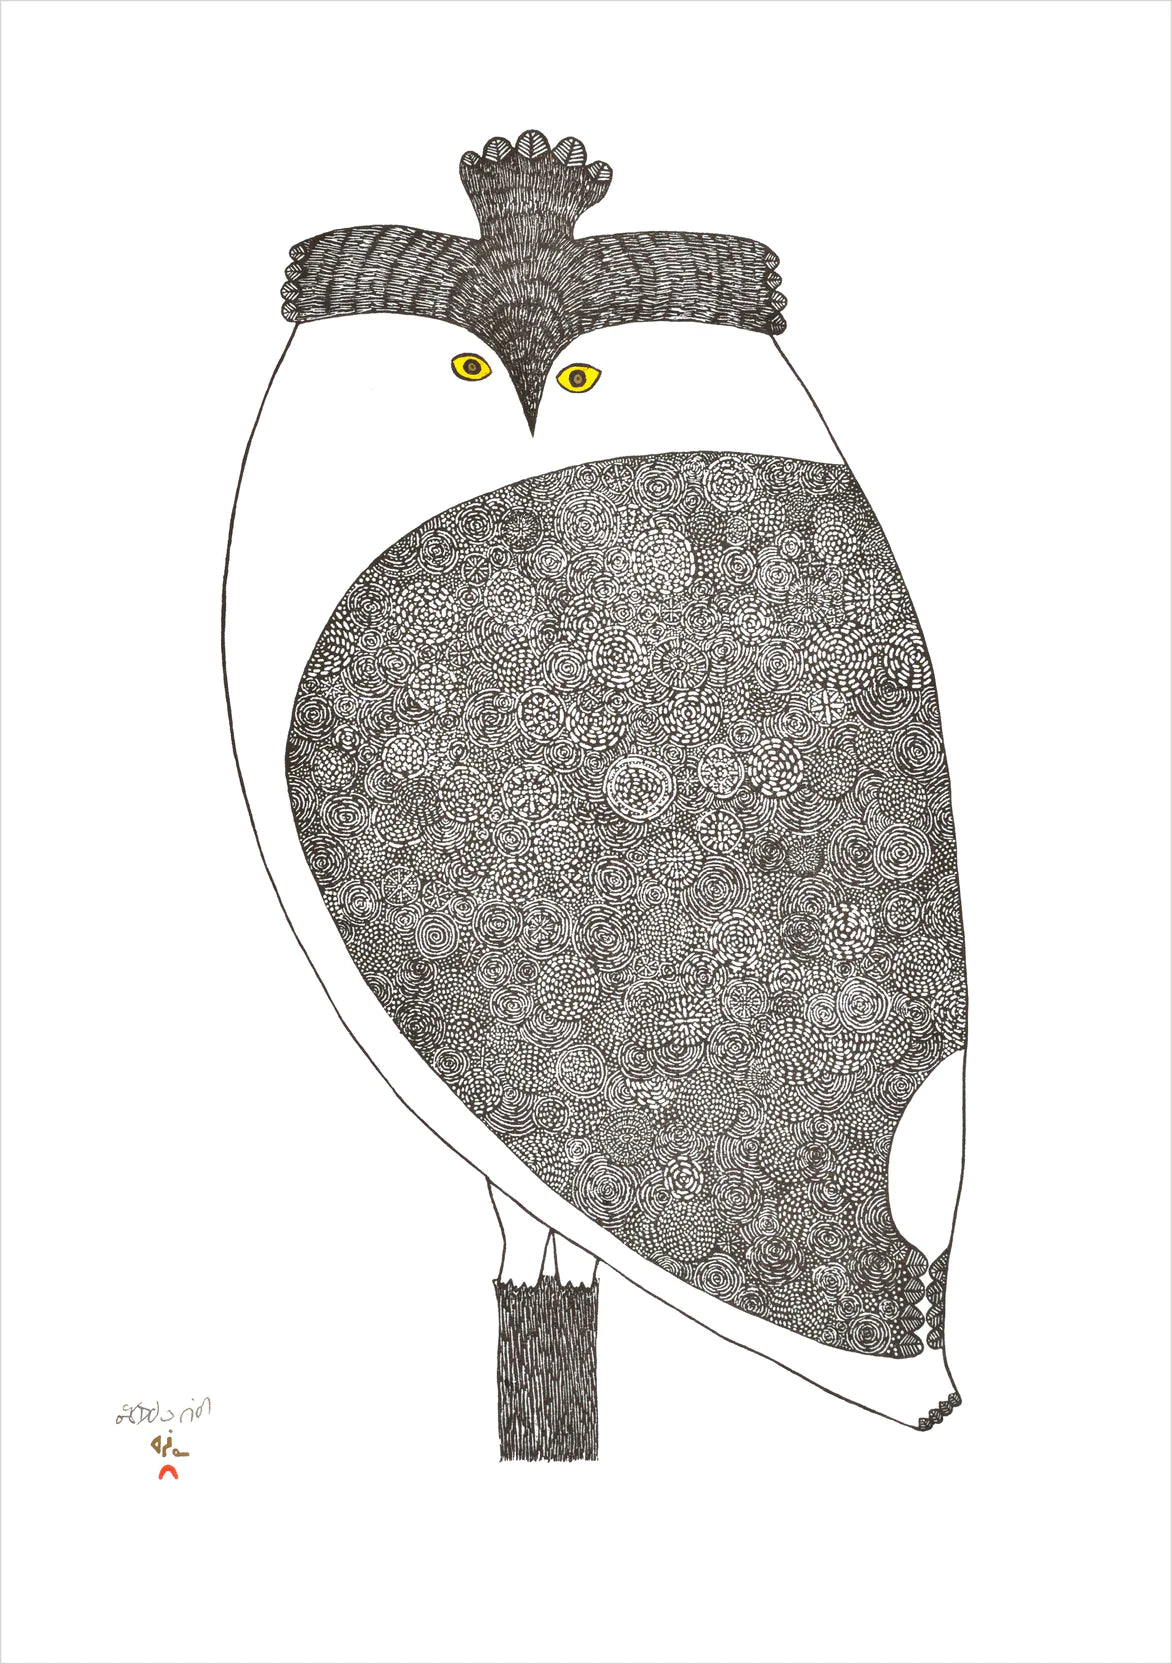 Owls Inuit Art Boxed Notecards